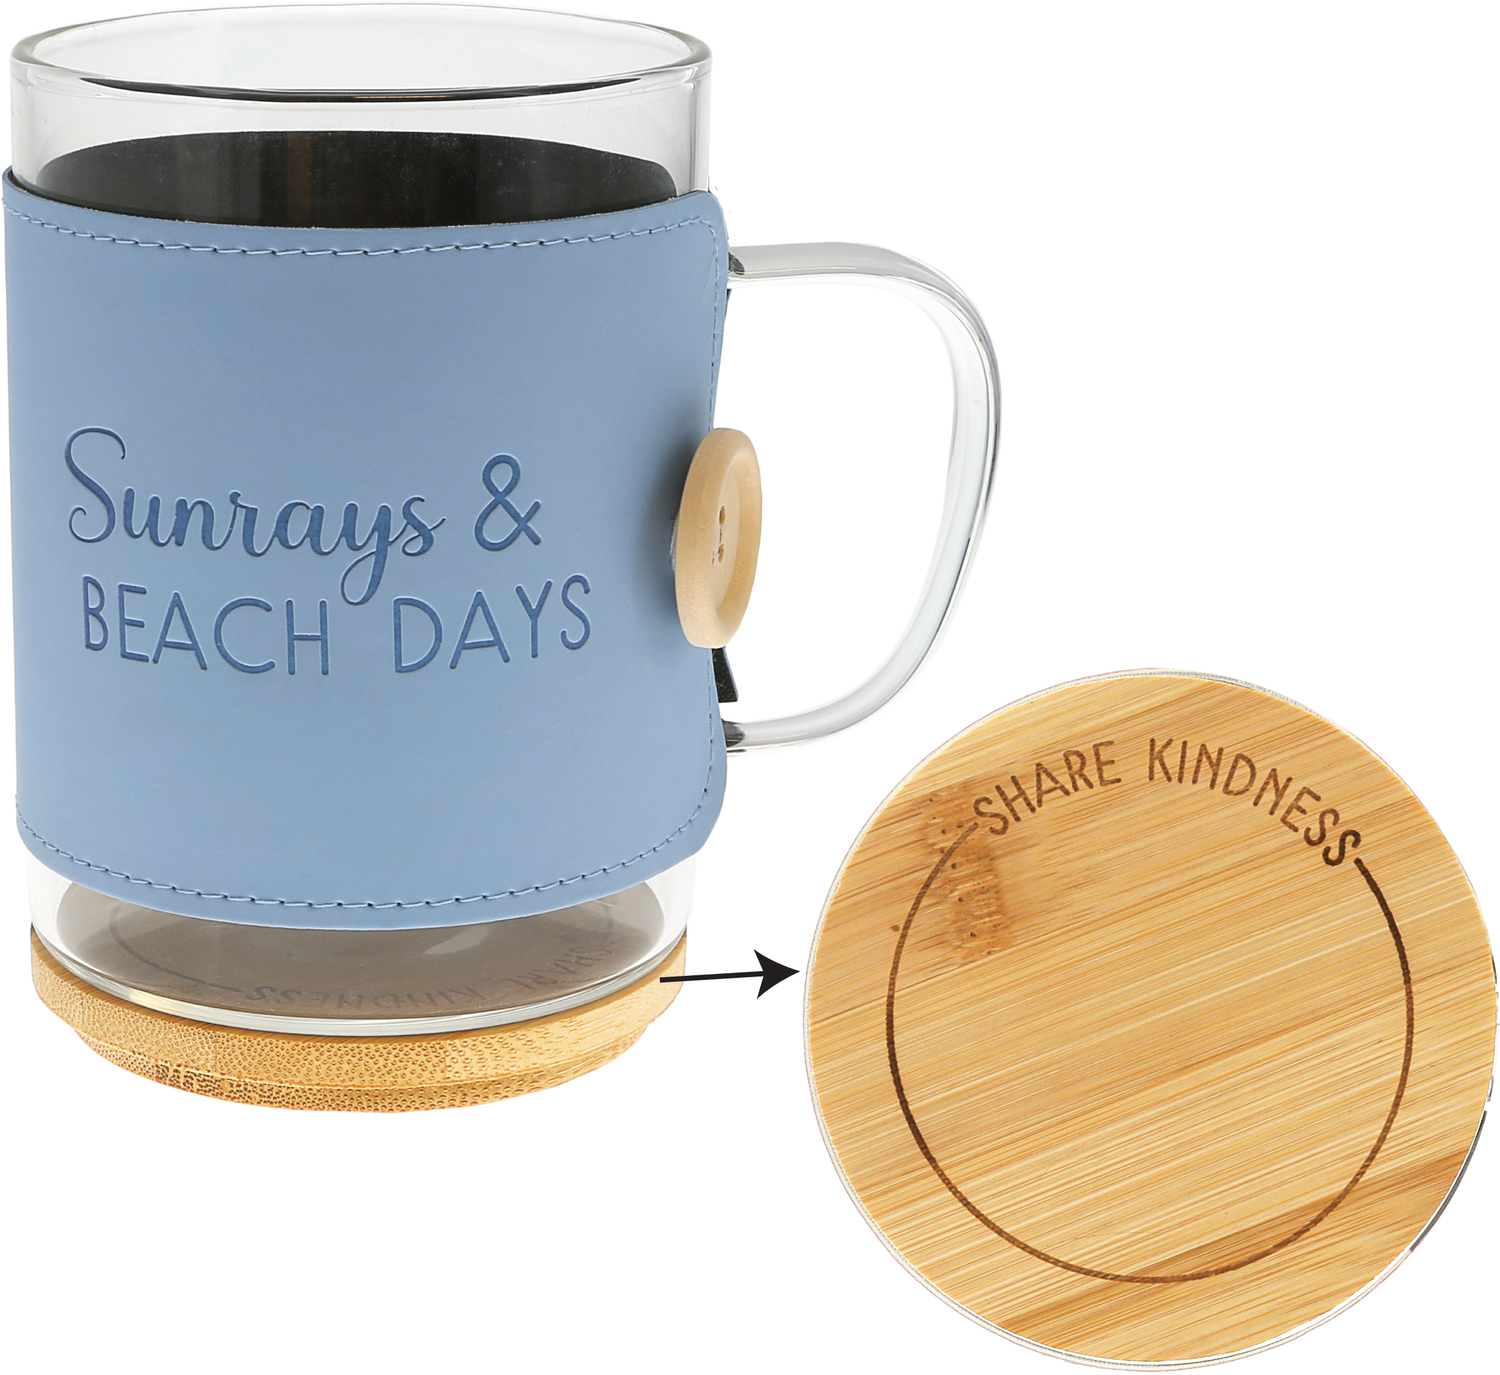 Beach Days by Wrapped in Kindness - Beach Days - 16 oz Wrapped Glass Mug with Coaster Lid